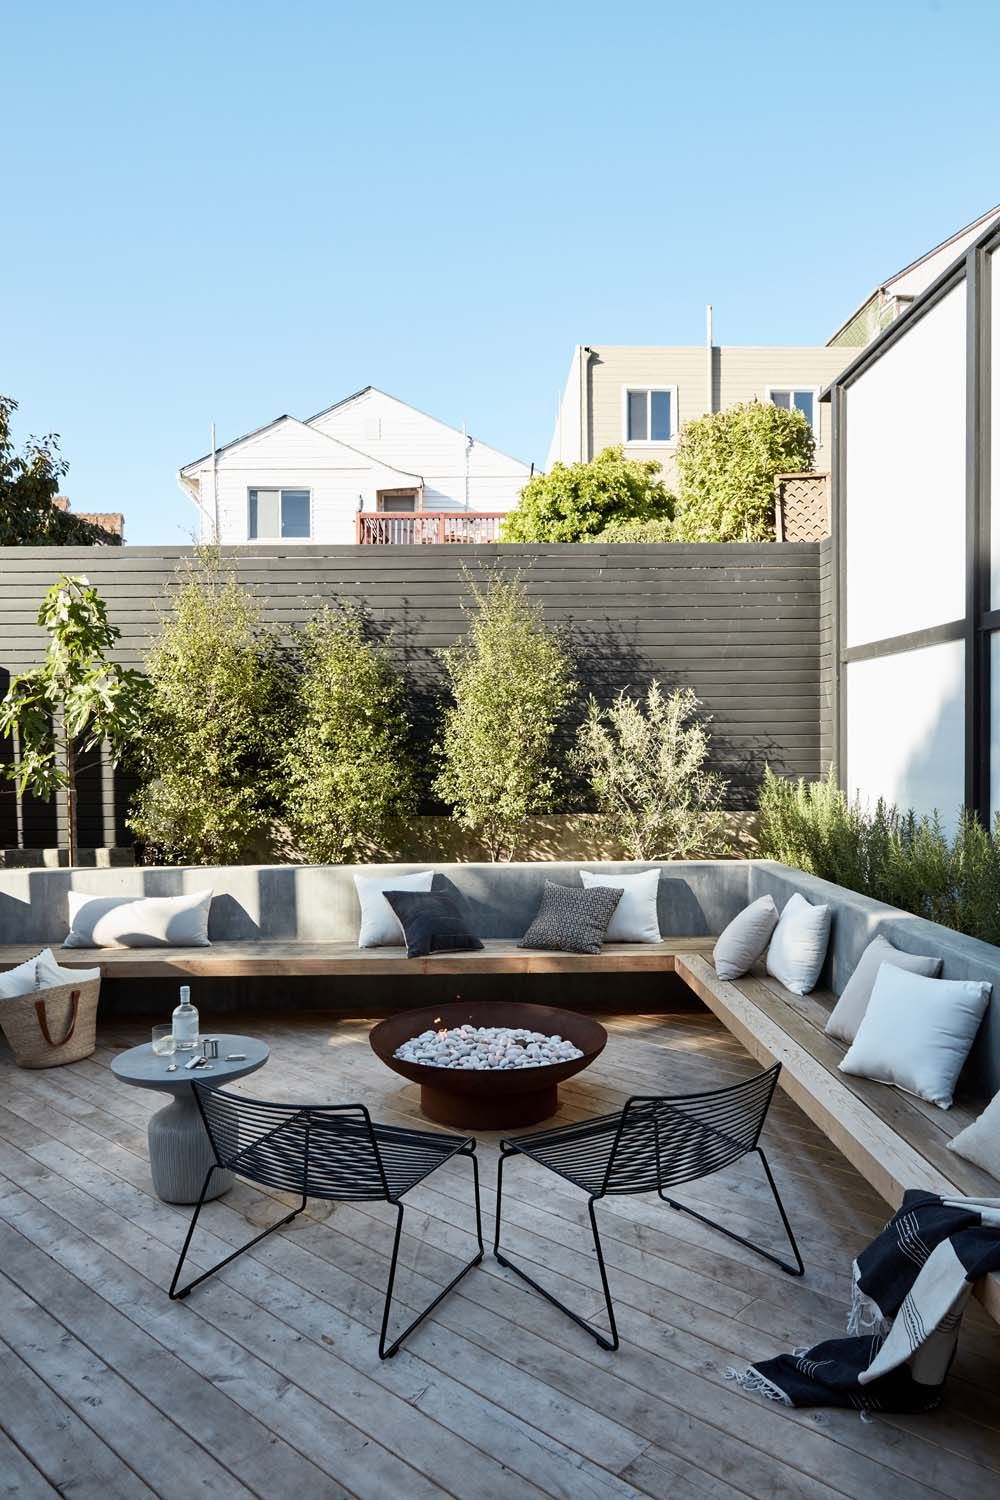 How We Designed Our Dream Yard on Apartment 34